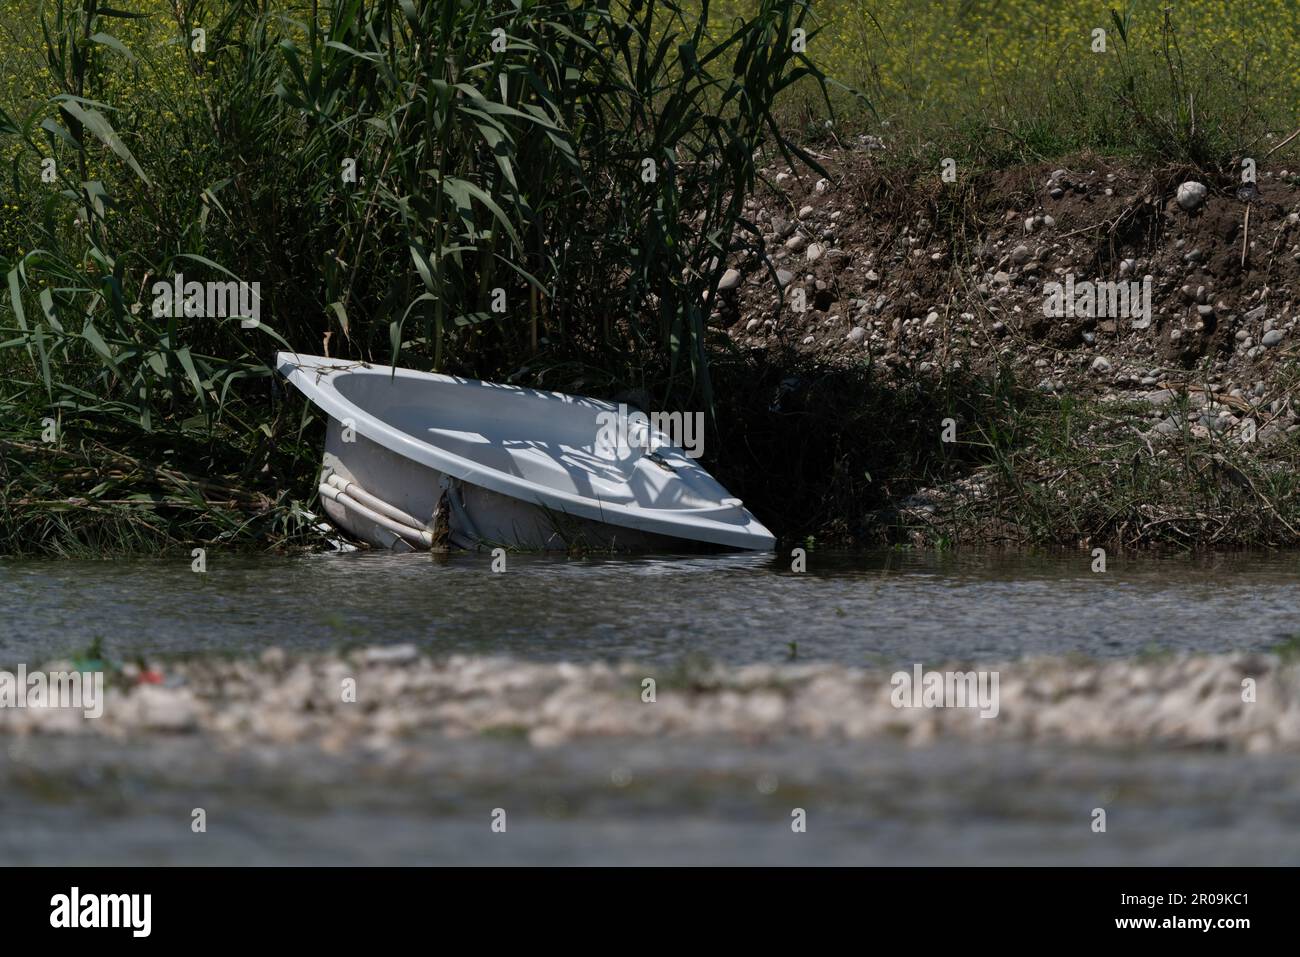 A bath tub dumped by the river. Destruction of the environment. Stock Photo